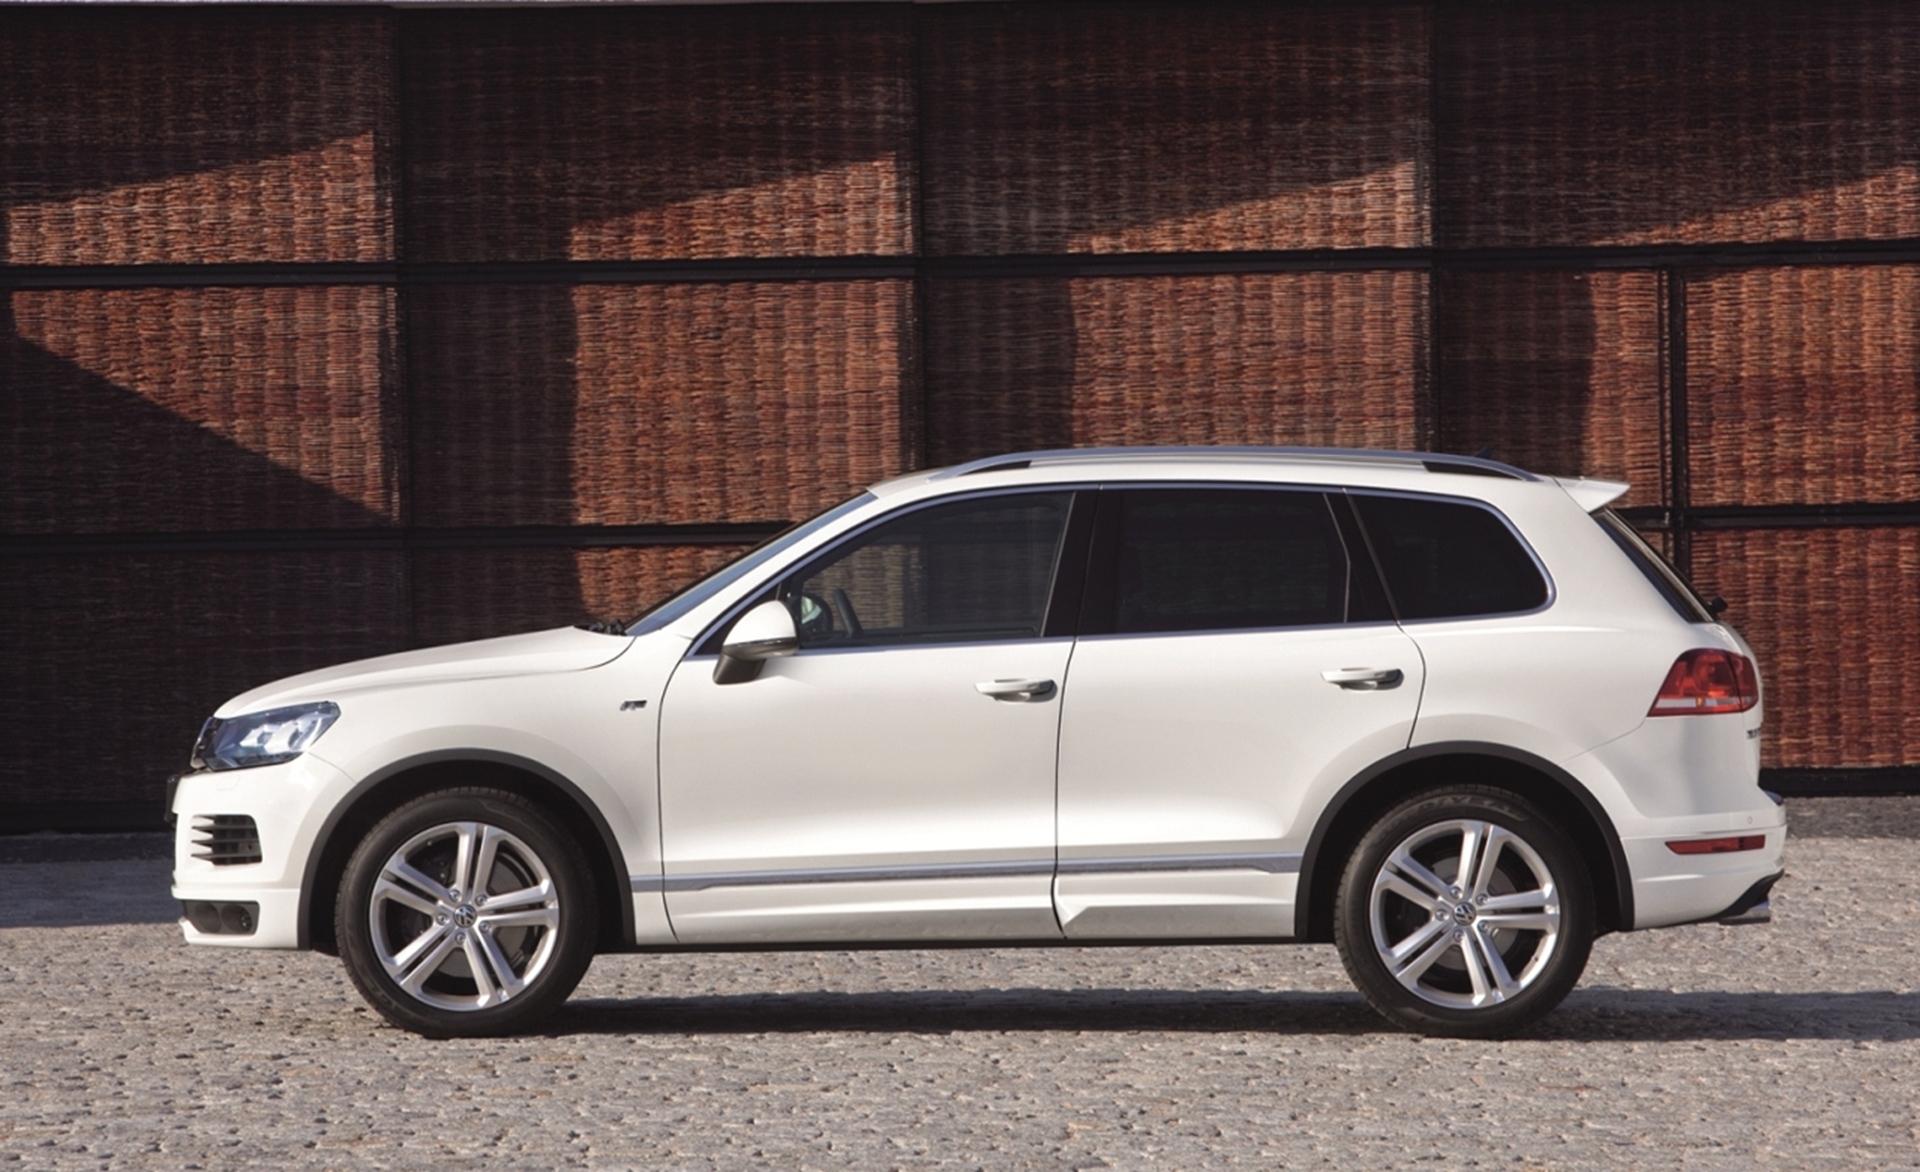 Volkswagen Touareg South Africa Touareg gets sporty, dynamic look with R-Line Package